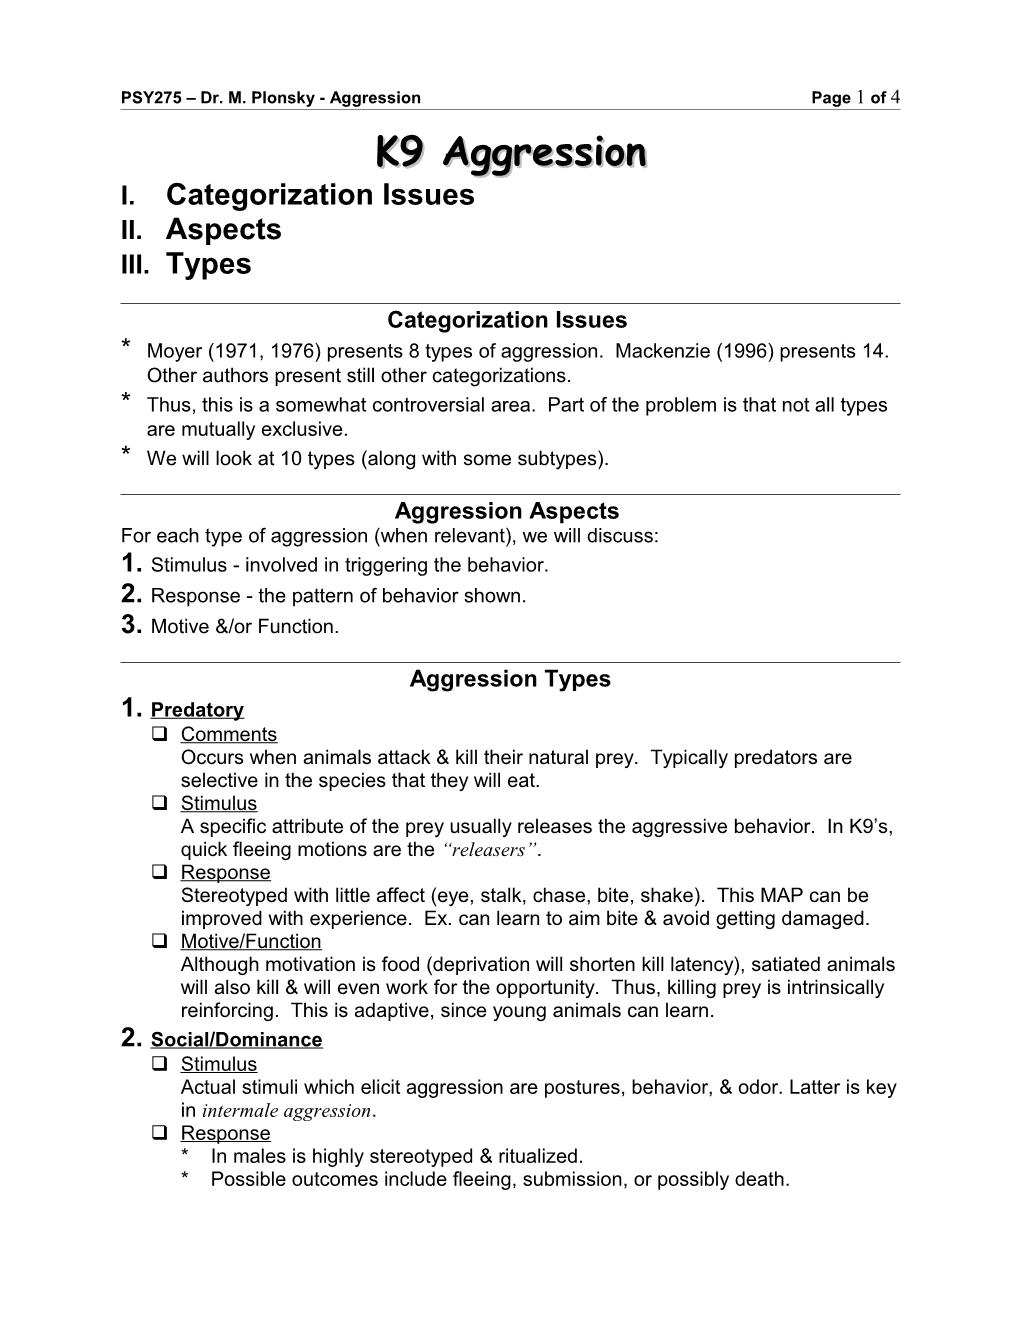 PSY275 Dr. M. Plonsky - Aggressionpage 1 of 3